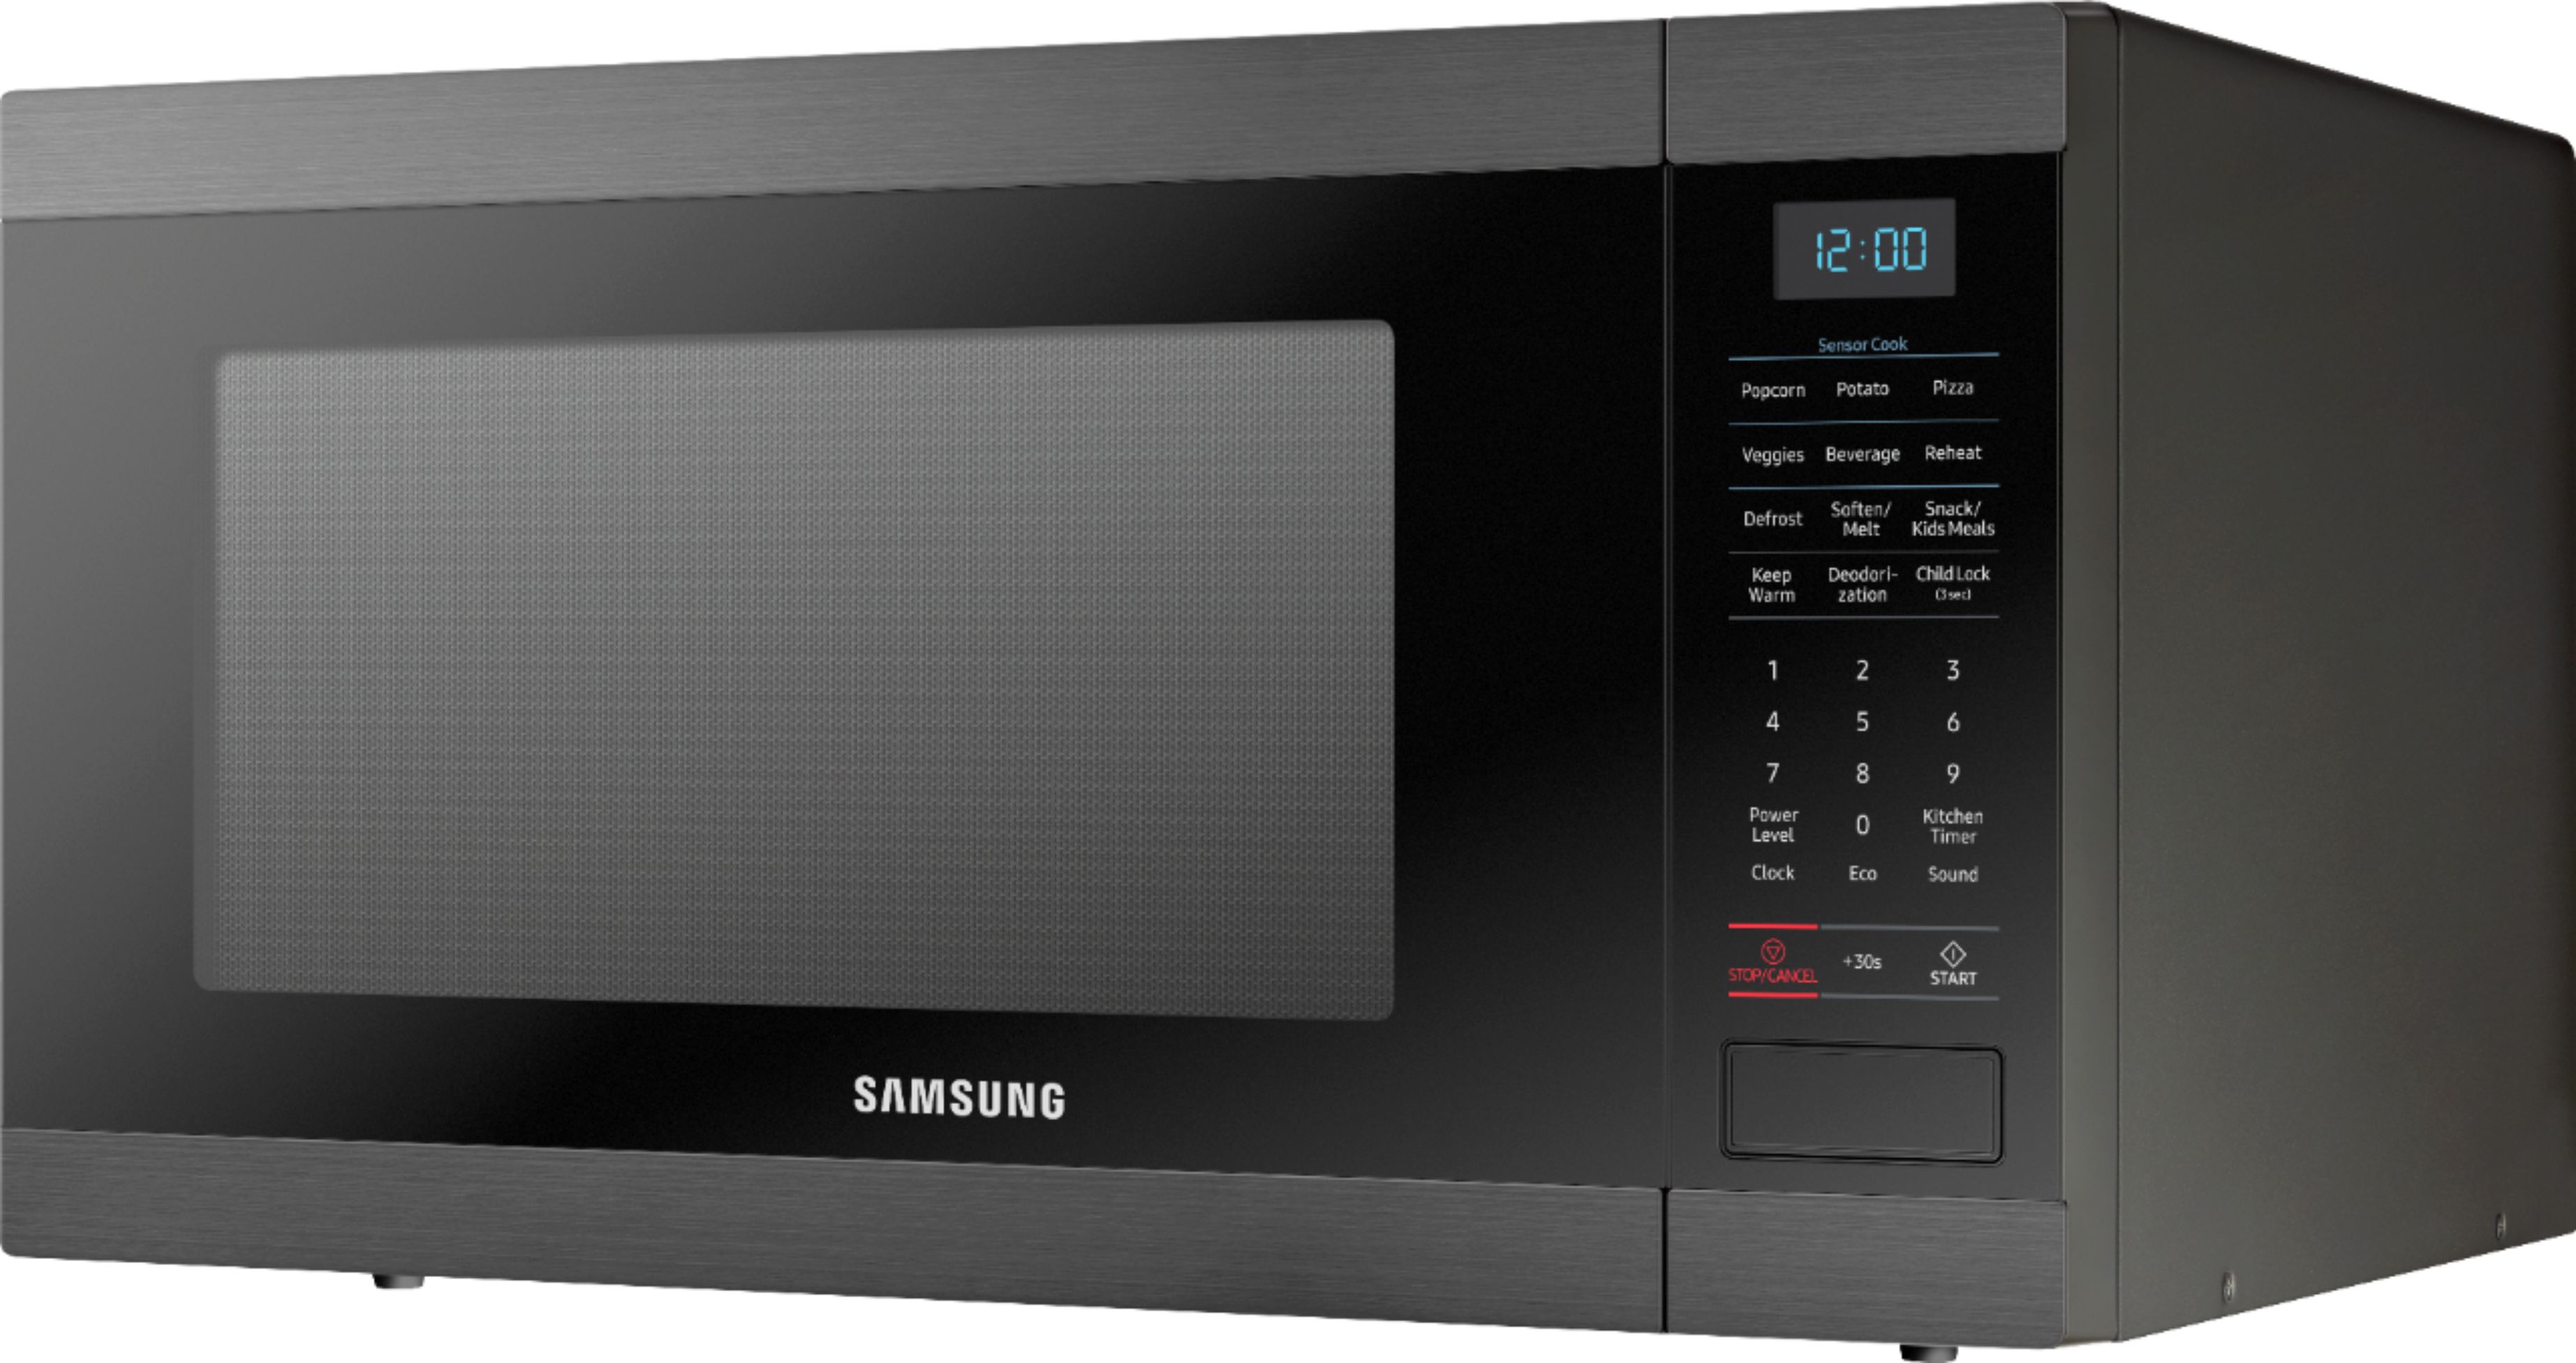 Left View: Samsung - 1.9 Cu. Ft. Countertop Microwave with Sensor Cook - Black stainless steel